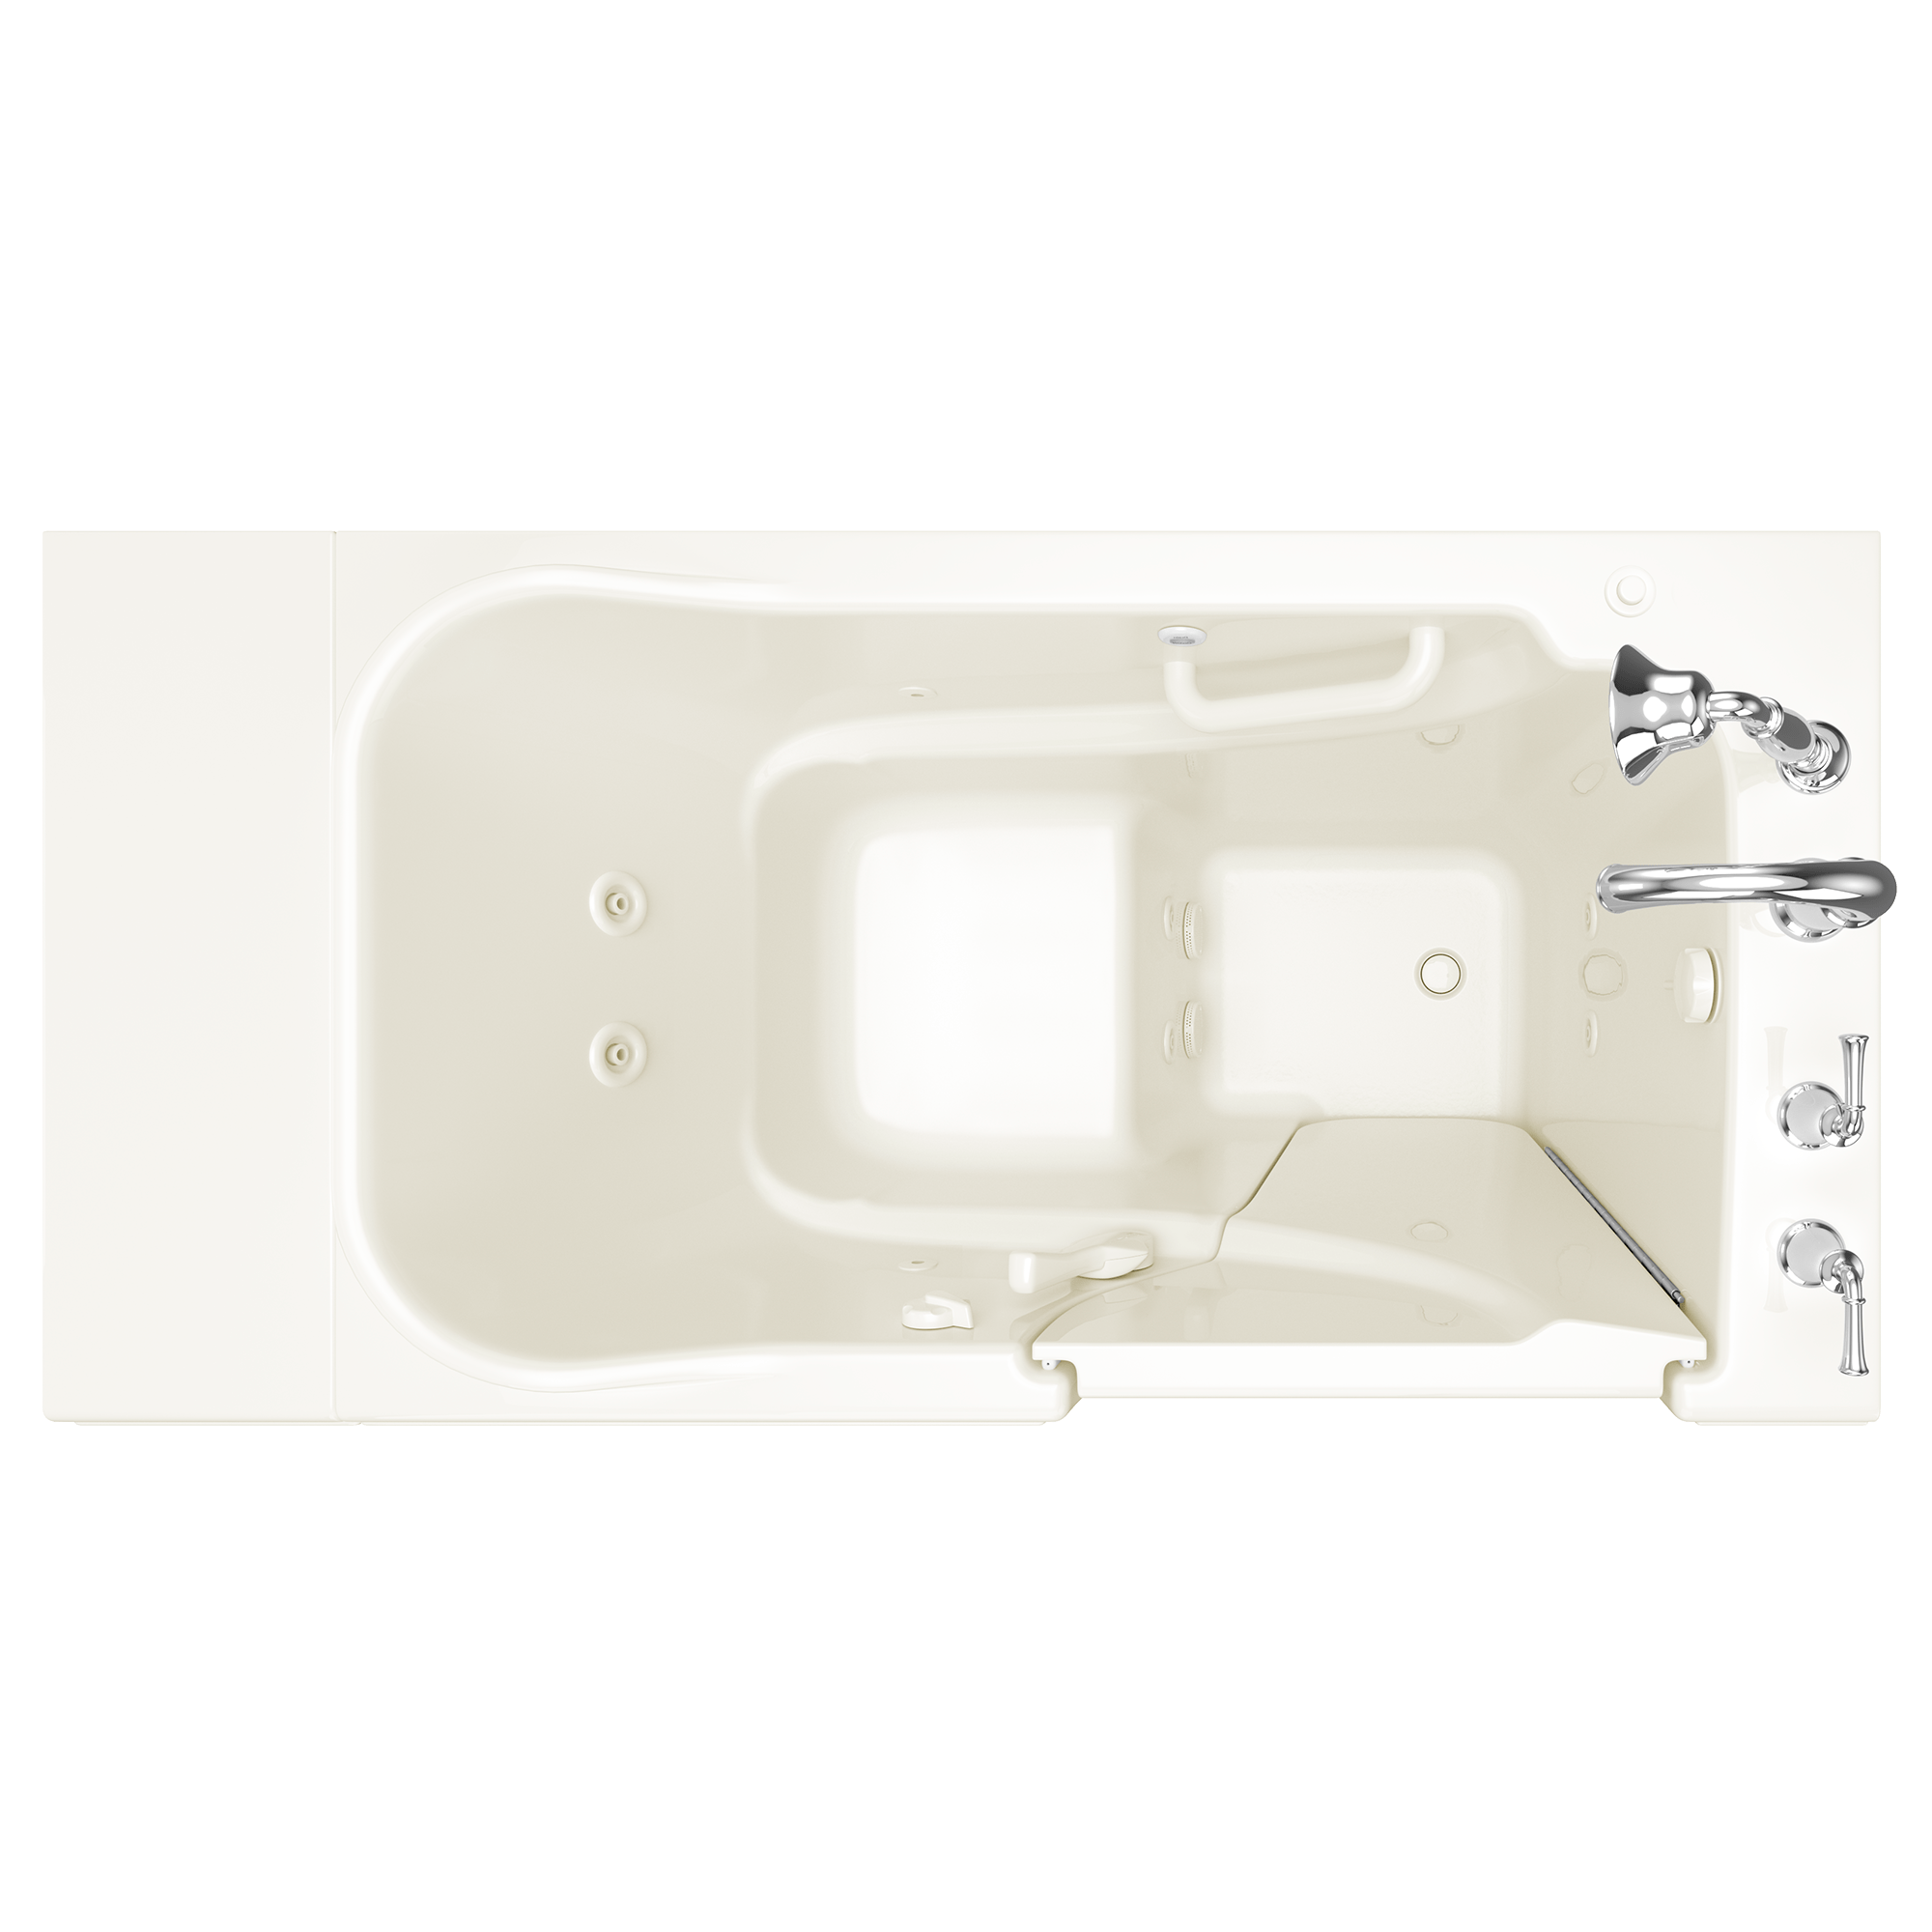 Gelcoat Value Series 30x52 Inch Walk-In Bathtub with Whirlpool Massage System - Right Hand Door and Drain